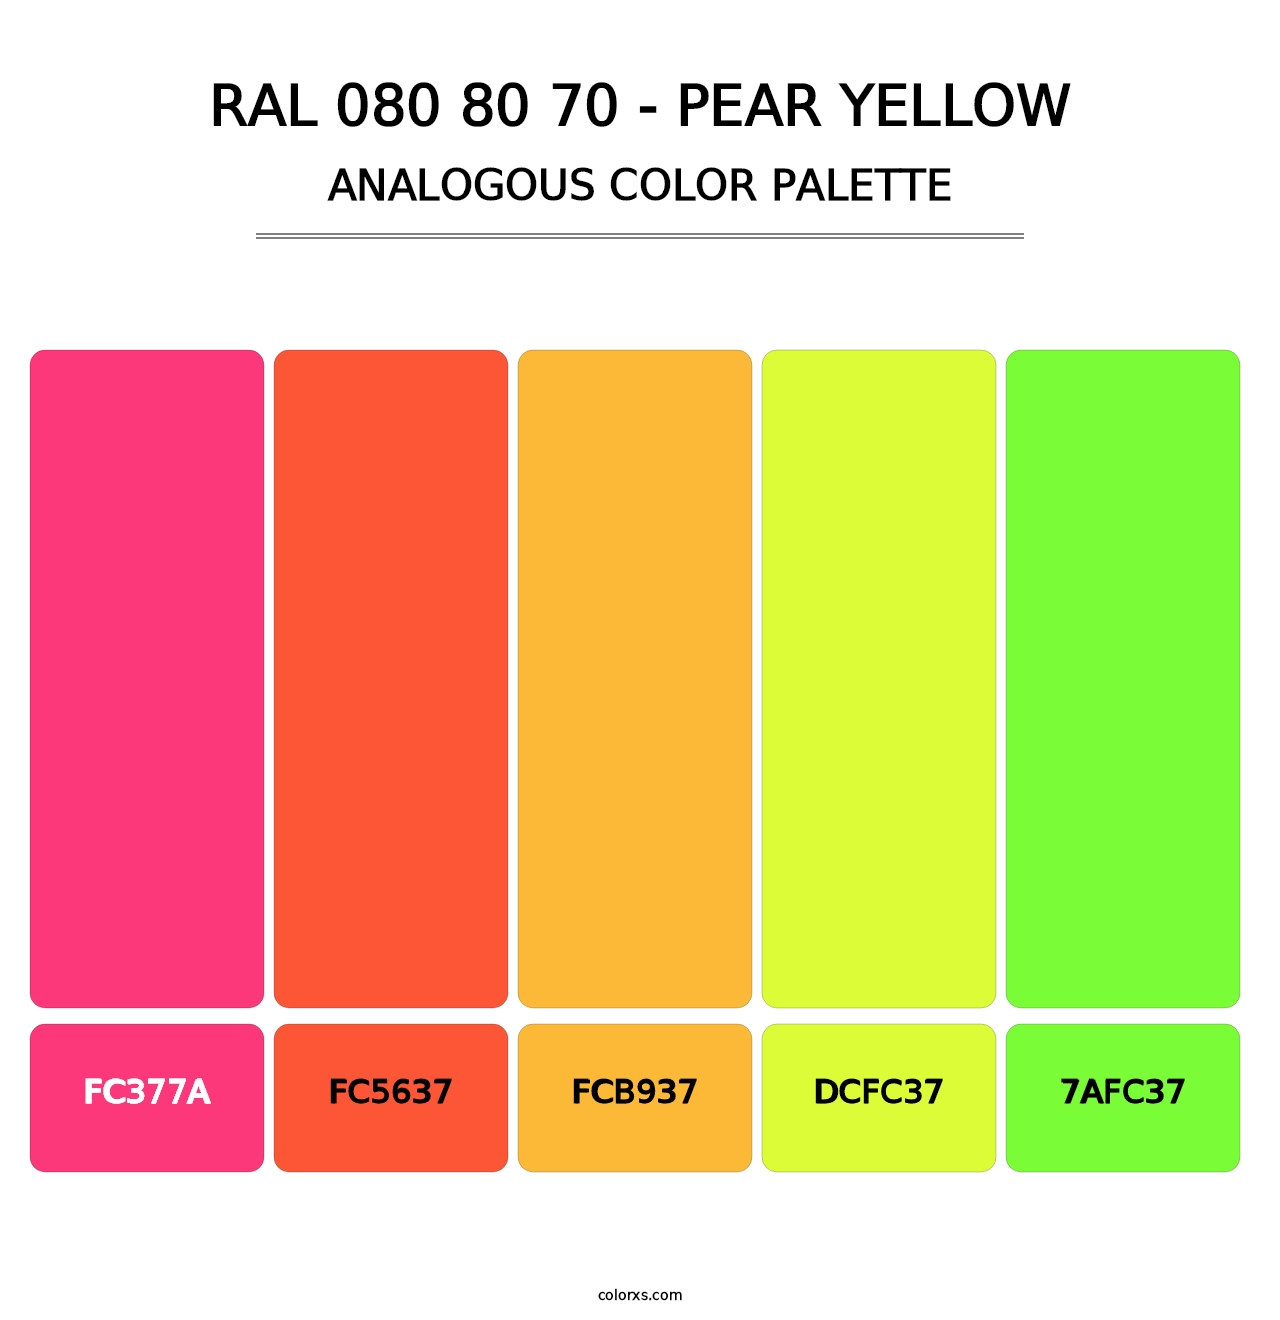 RAL 080 80 70 - Pear Yellow - Analogous Color Palette